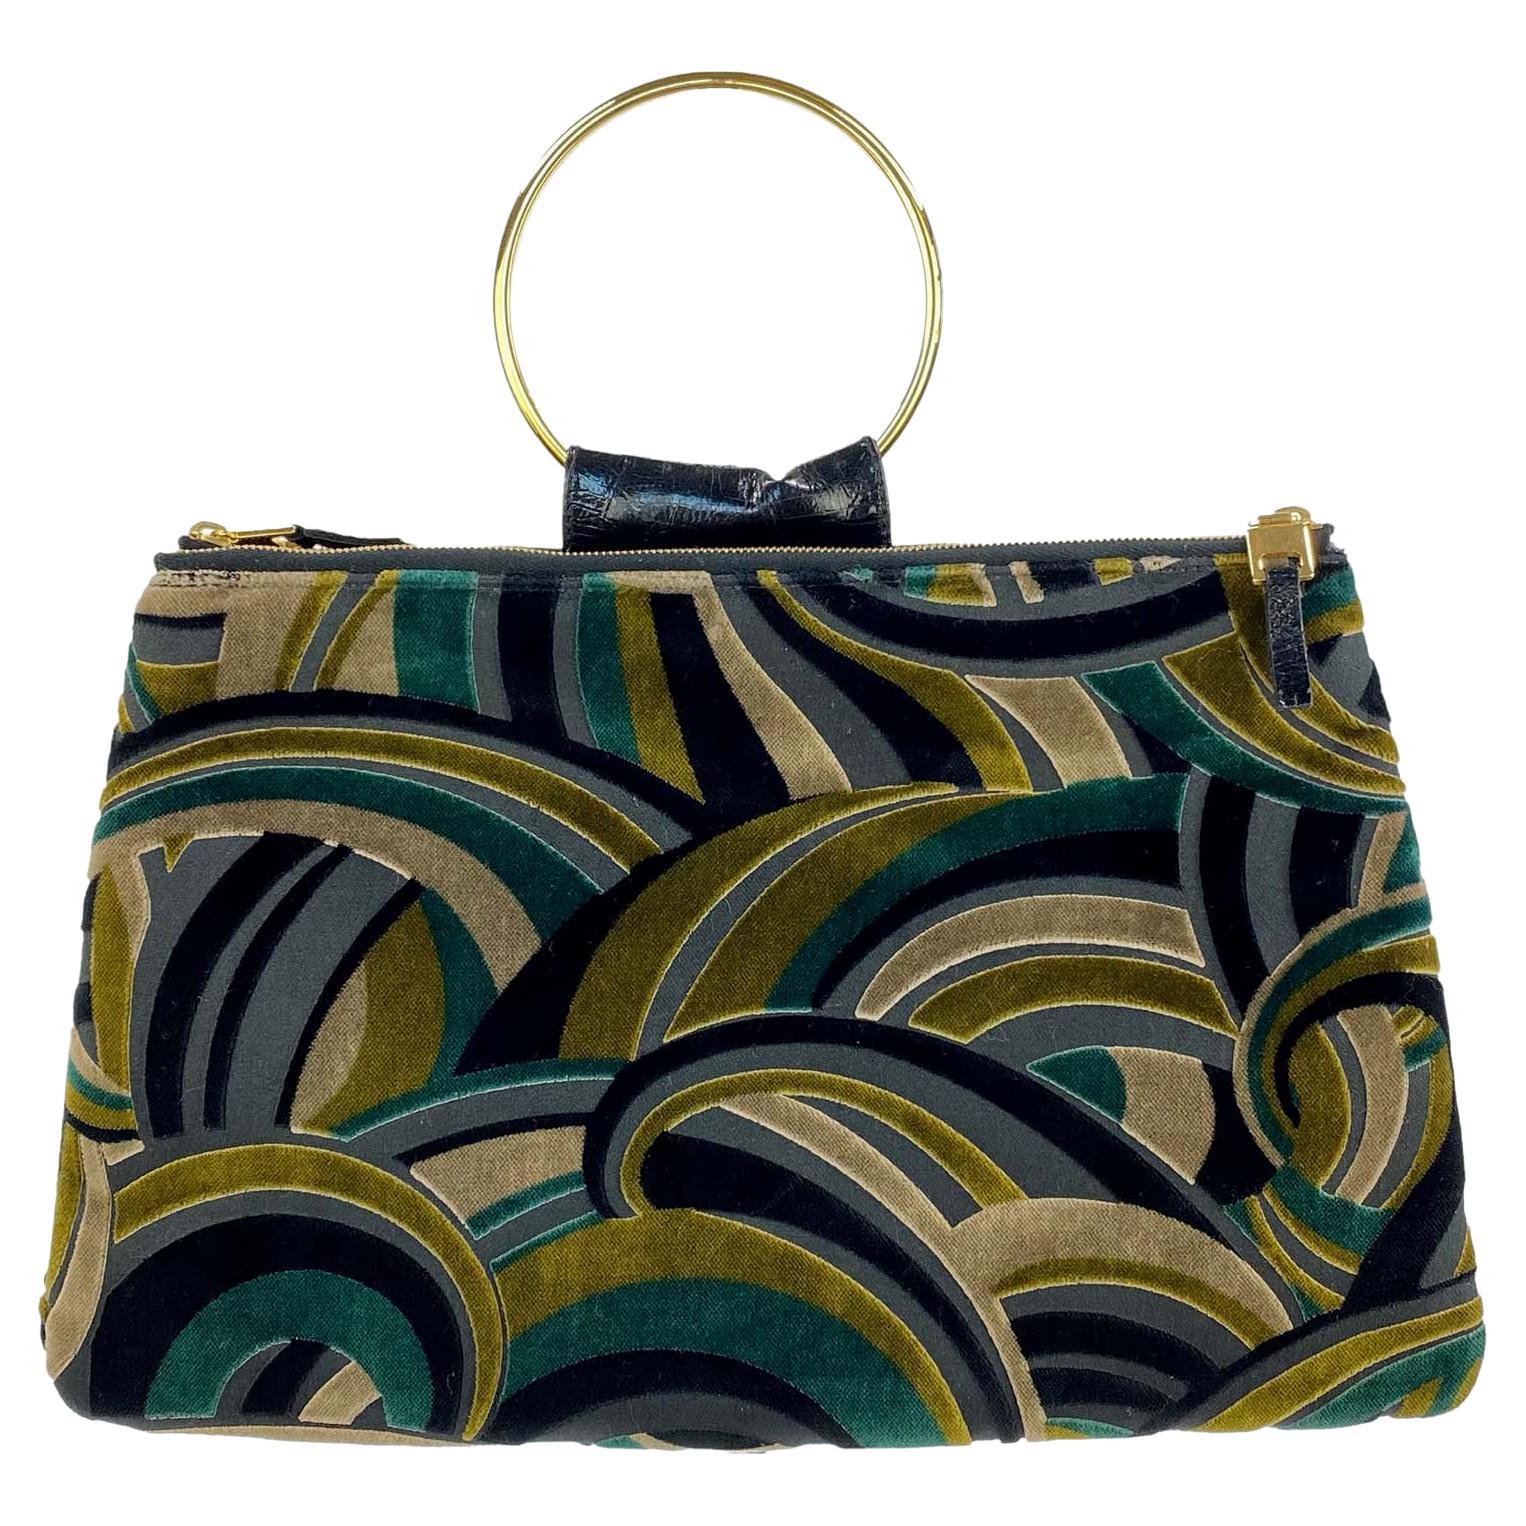 F/W 2000 Gianni Versace by Donatella Versace Psychedelic Green Velvet Ring Bag